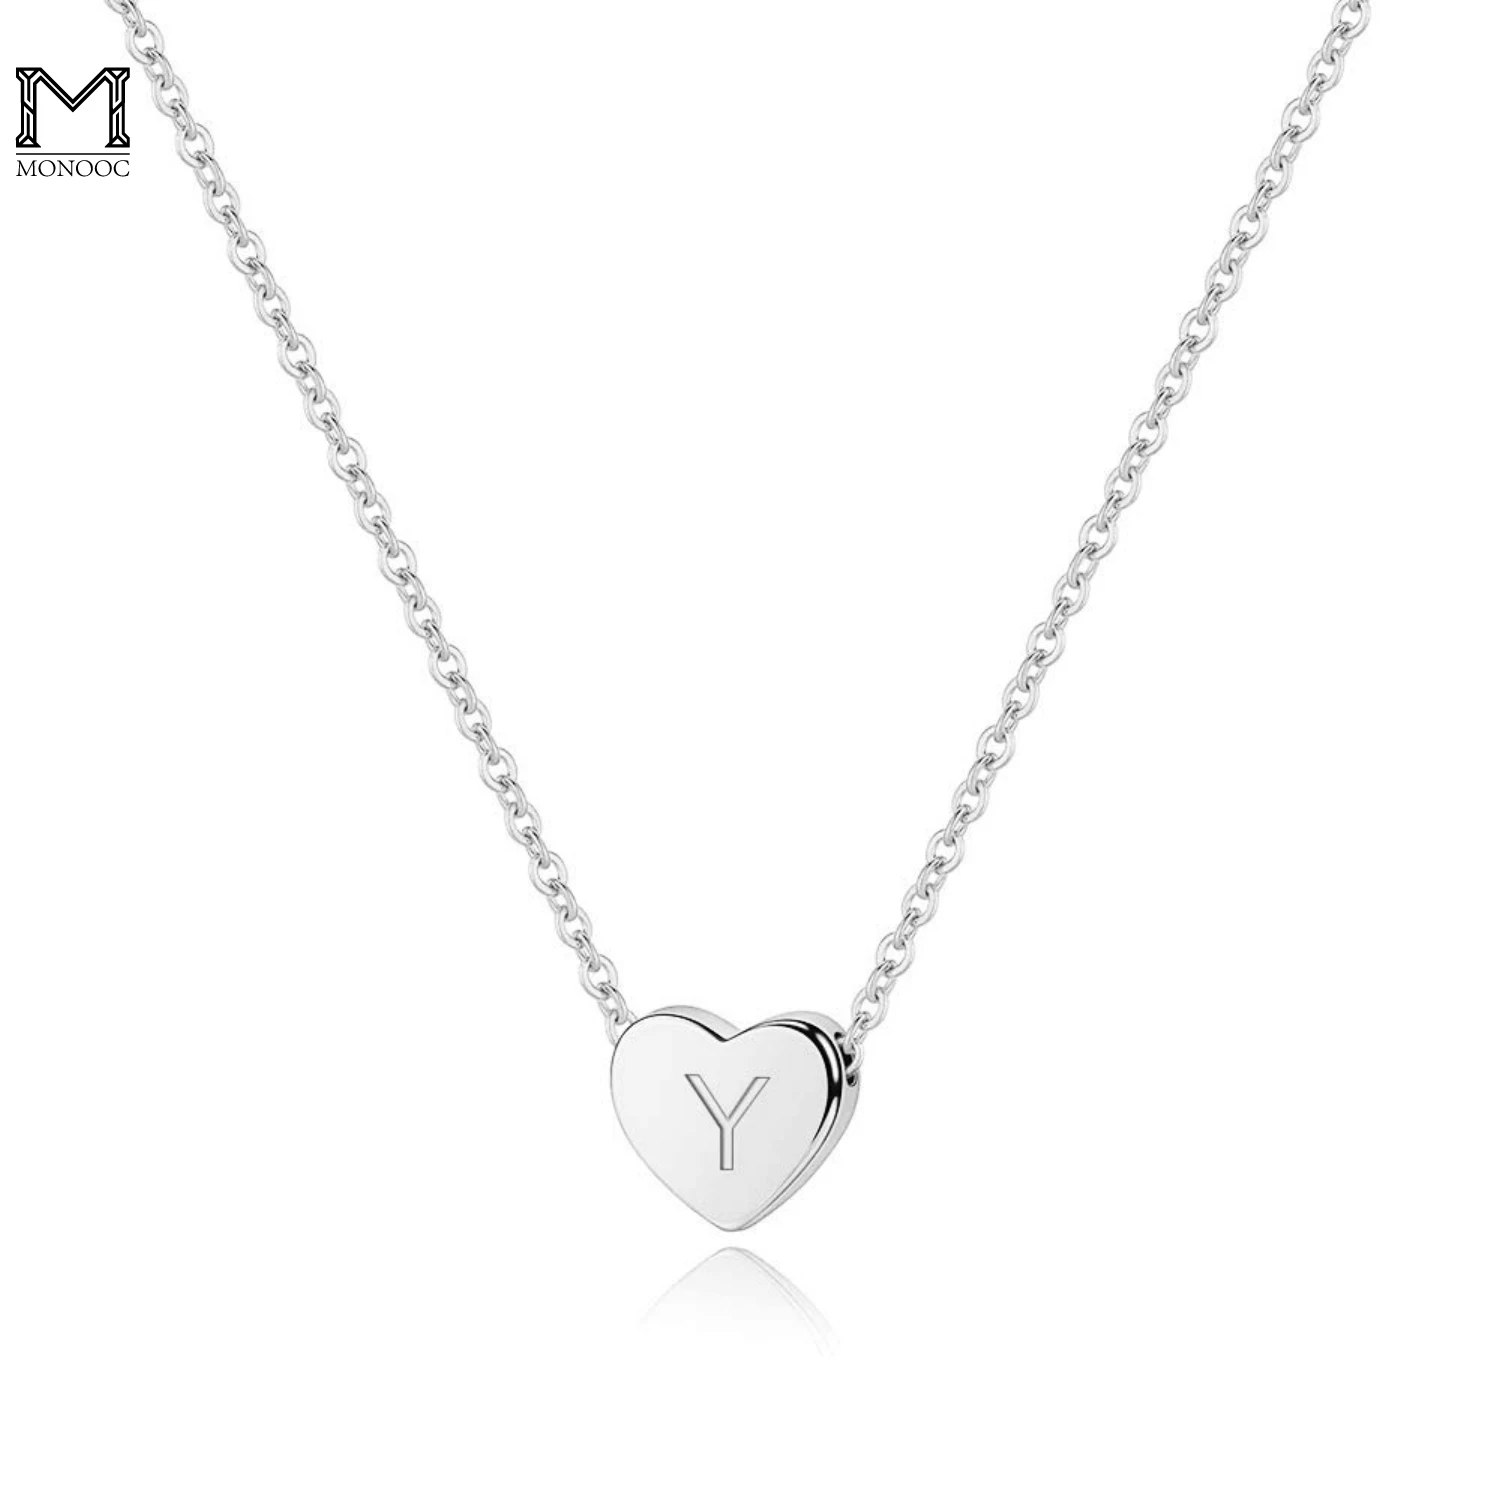 

MONOOC S925 Sterling Silver Heart Initial Necklace 14K Gold Plated Dainty Tiny Alphabet Silver Necklace for Women Girls Kids